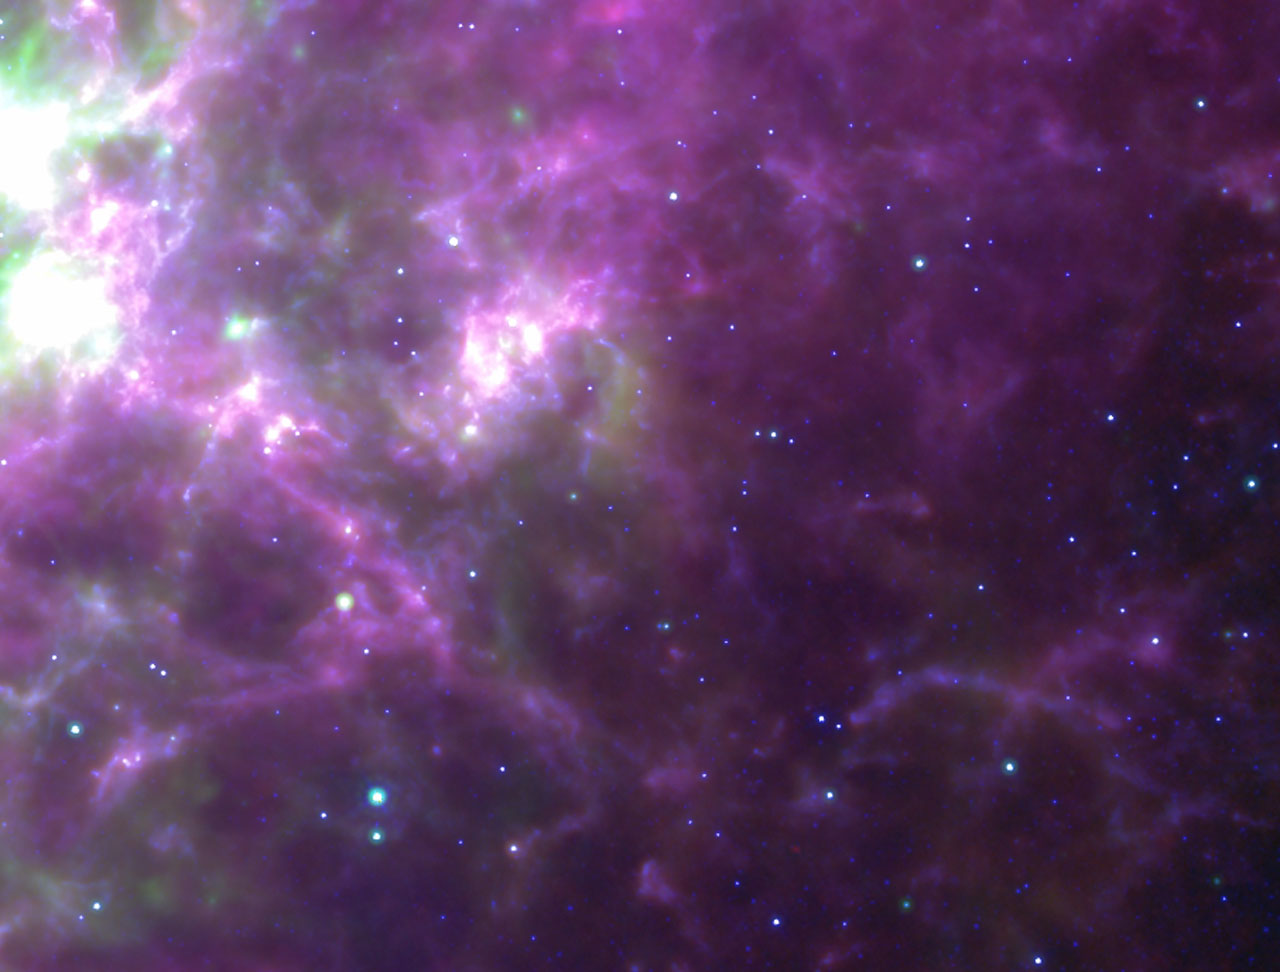 Spitzer/IRAC/MIPS and Herschel/SPIRE composites of SN1987A remnant in the Large Magellanic Cloud (Courtesy HERITAGE)